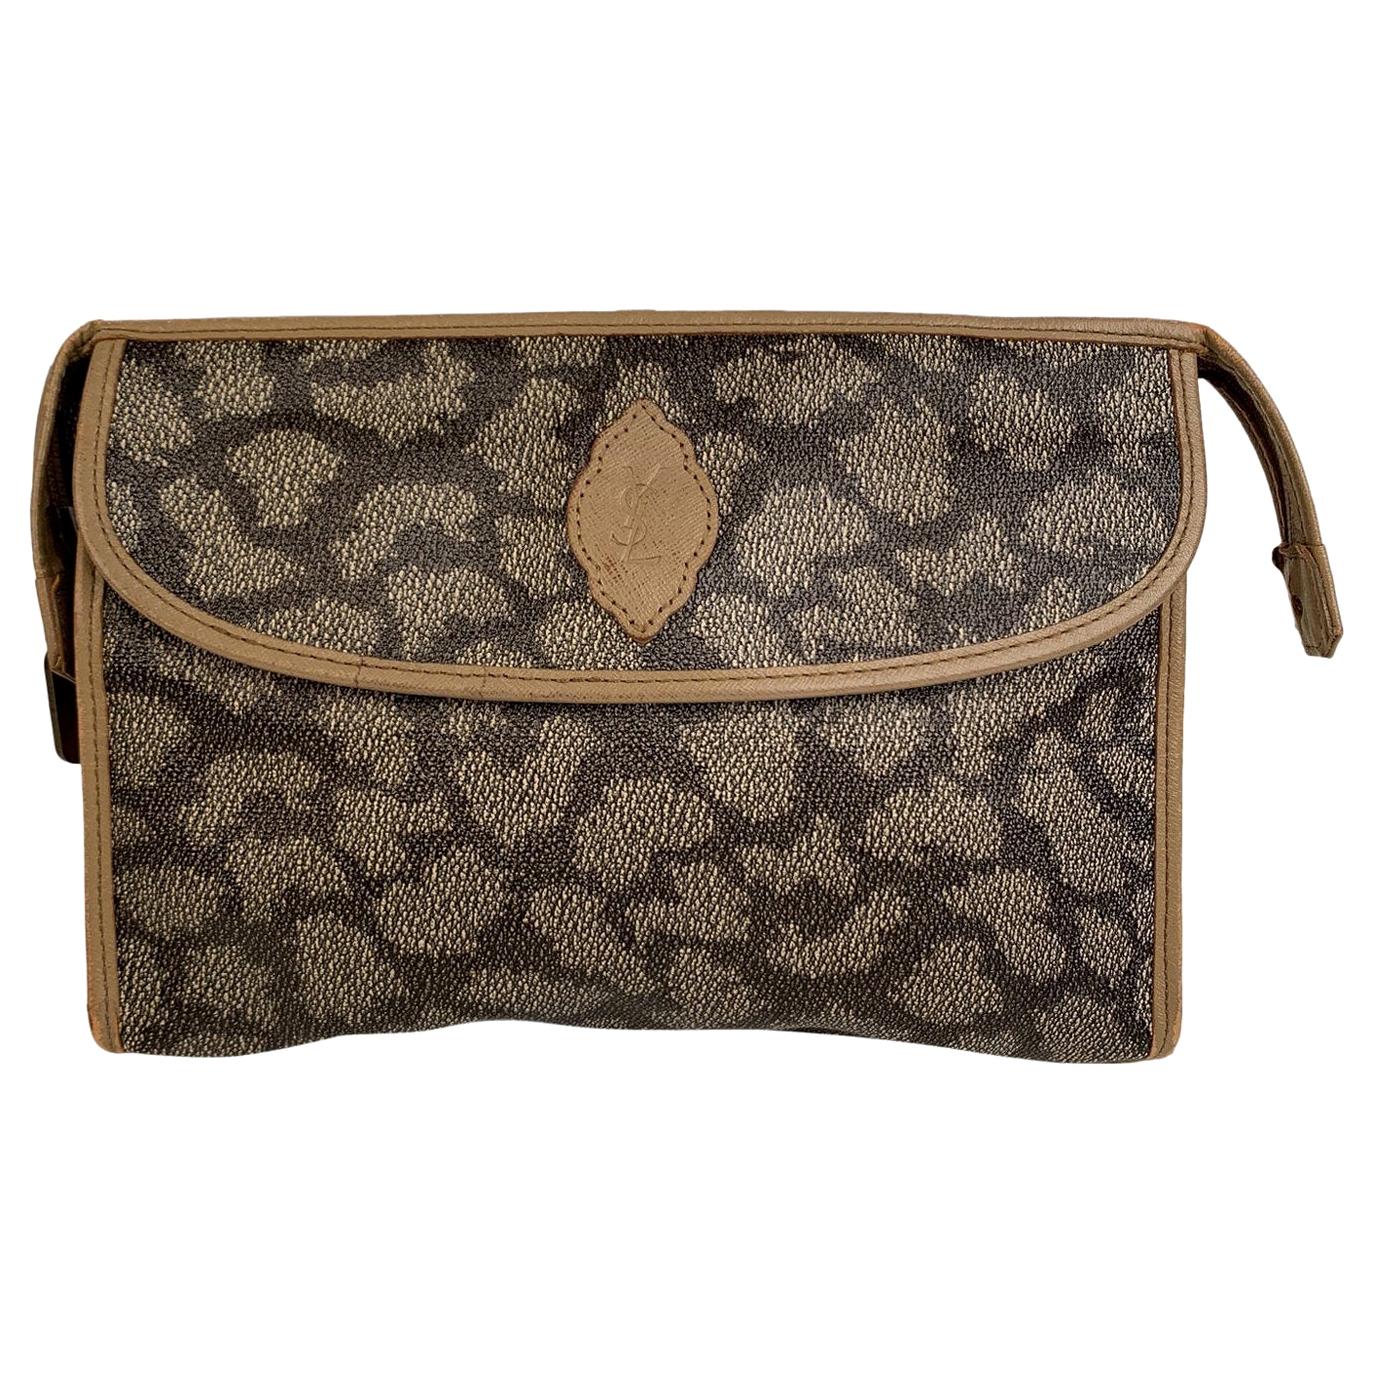 Yves Saint Laurent Vintage Tan Spotted Canvas Cosmetic Bag